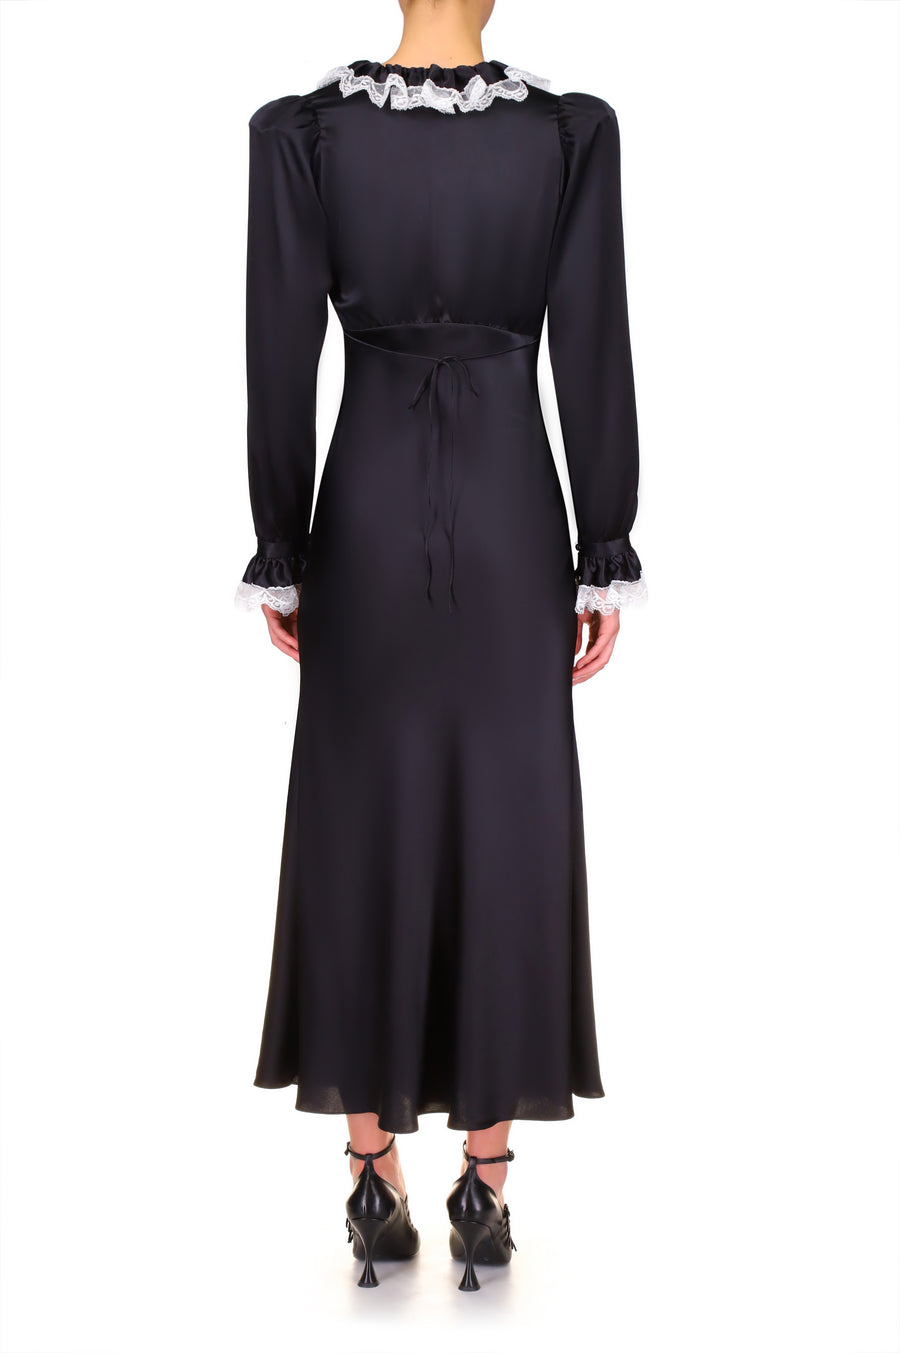 Black Silk Long Sleeve Dress With Off White Collar And Lace Trim